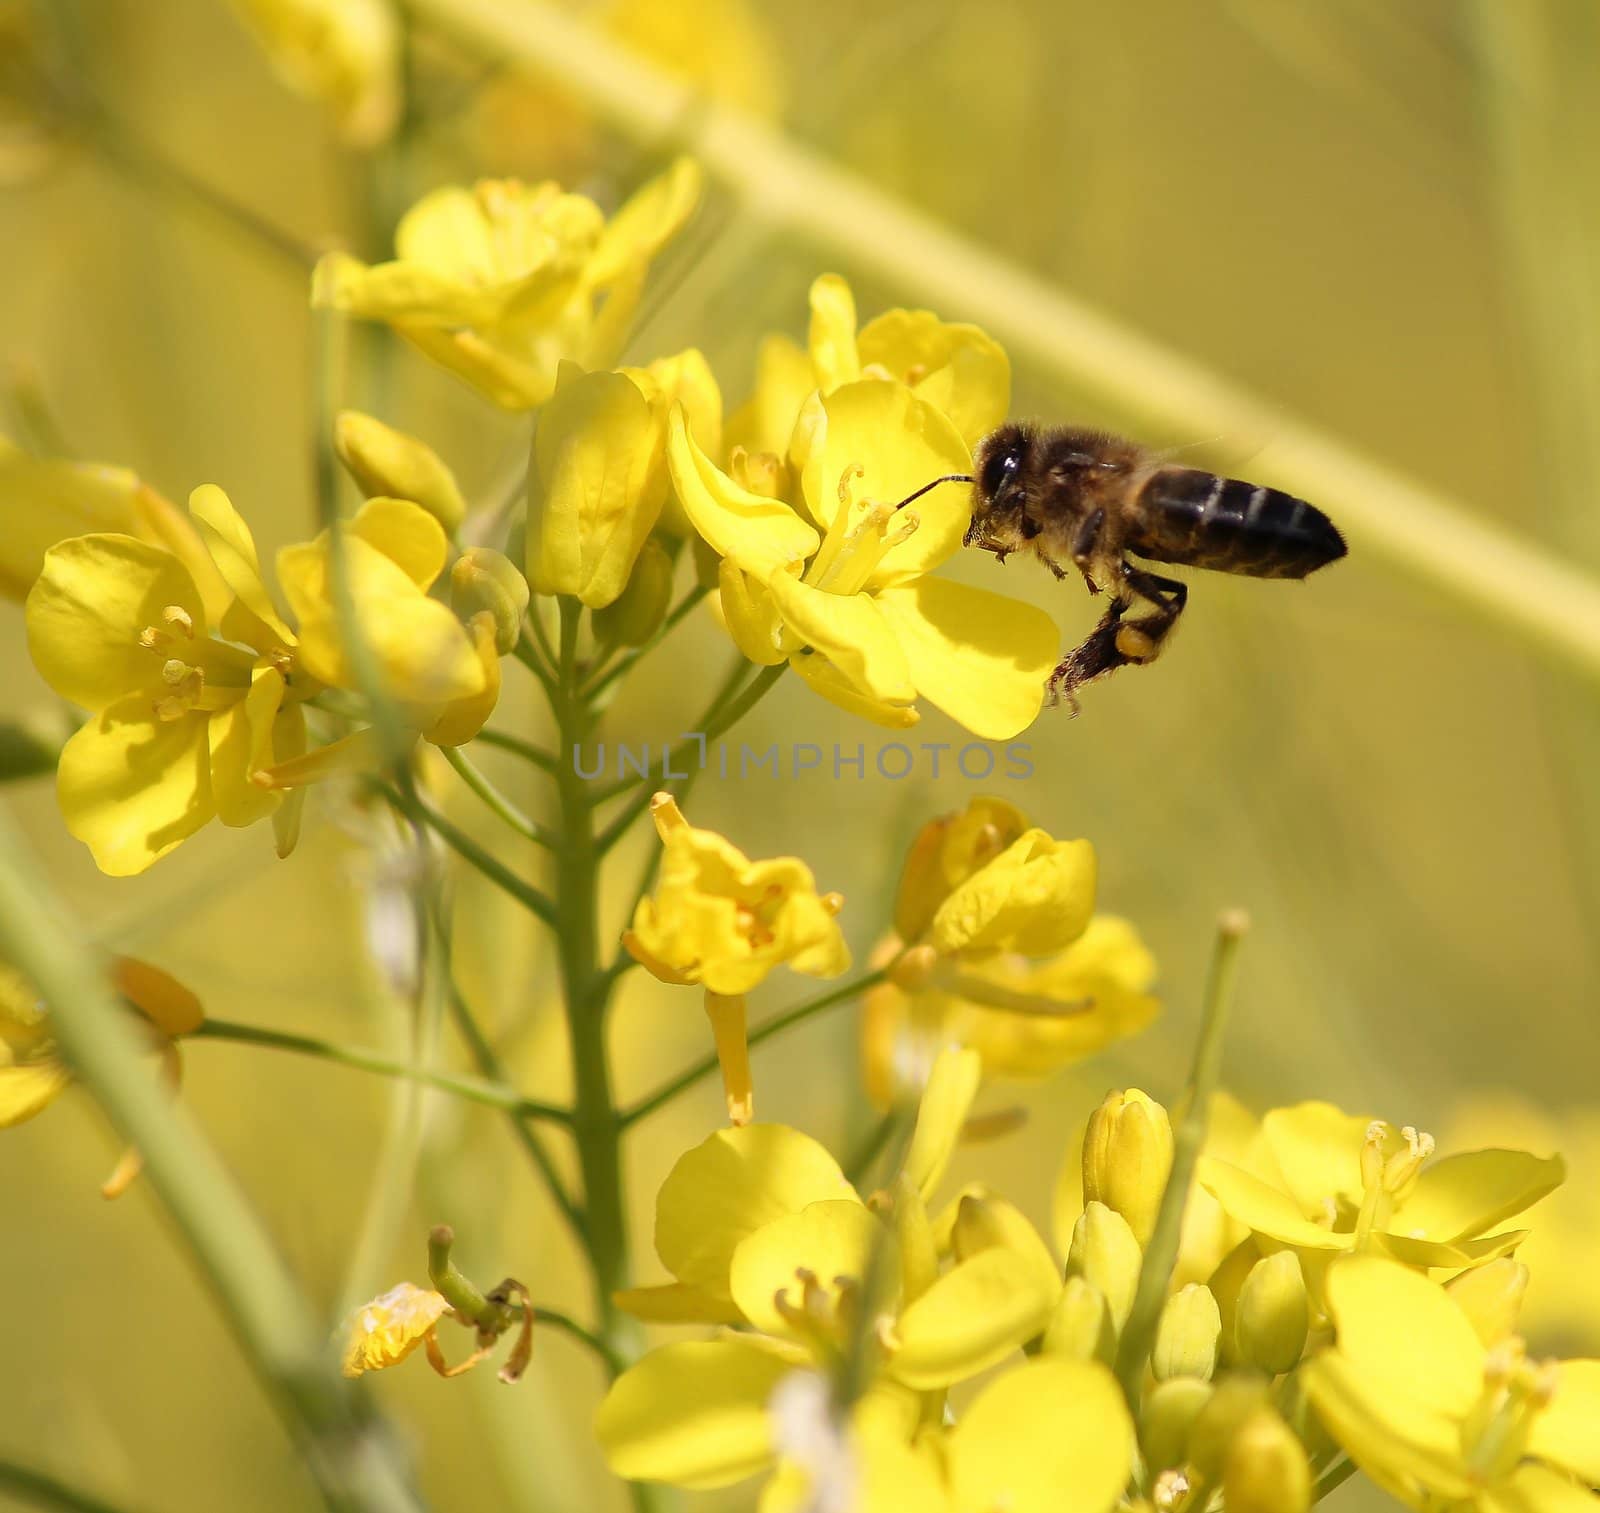 A bee aproaching an yellow flower in spring